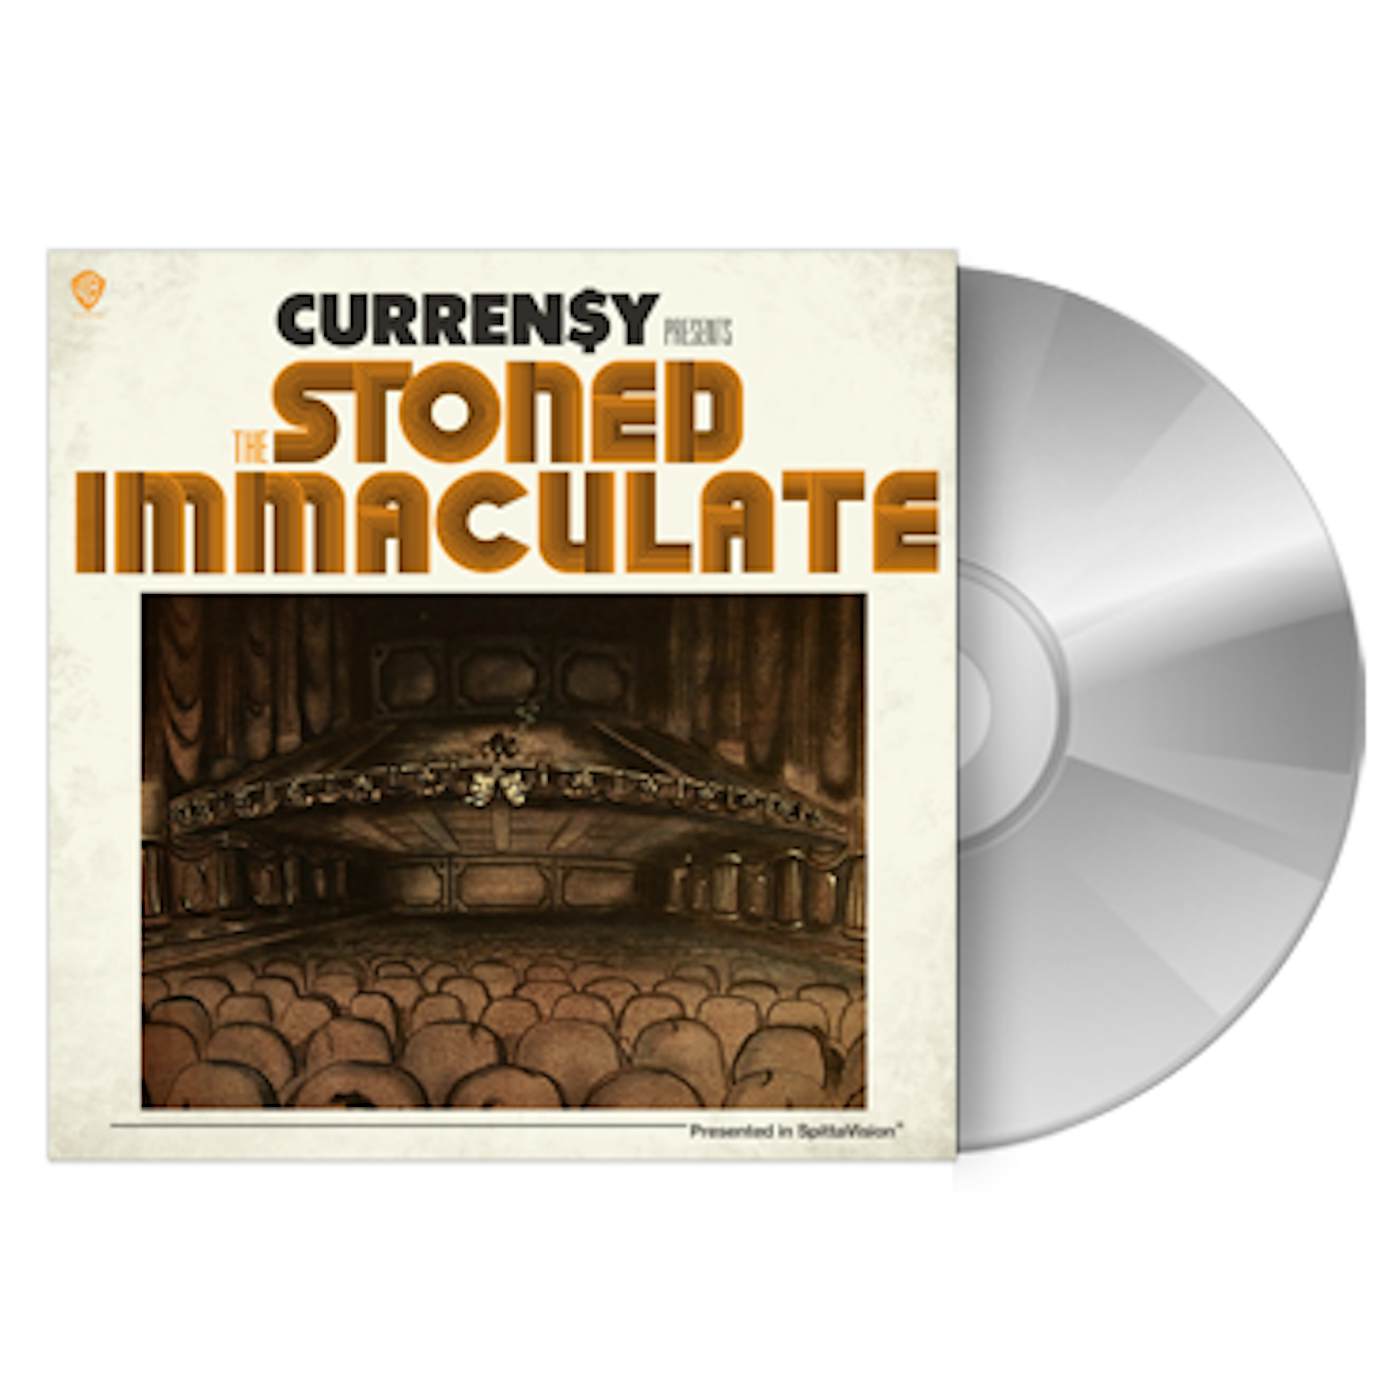 Curren$y The Stoned Immaculate CD